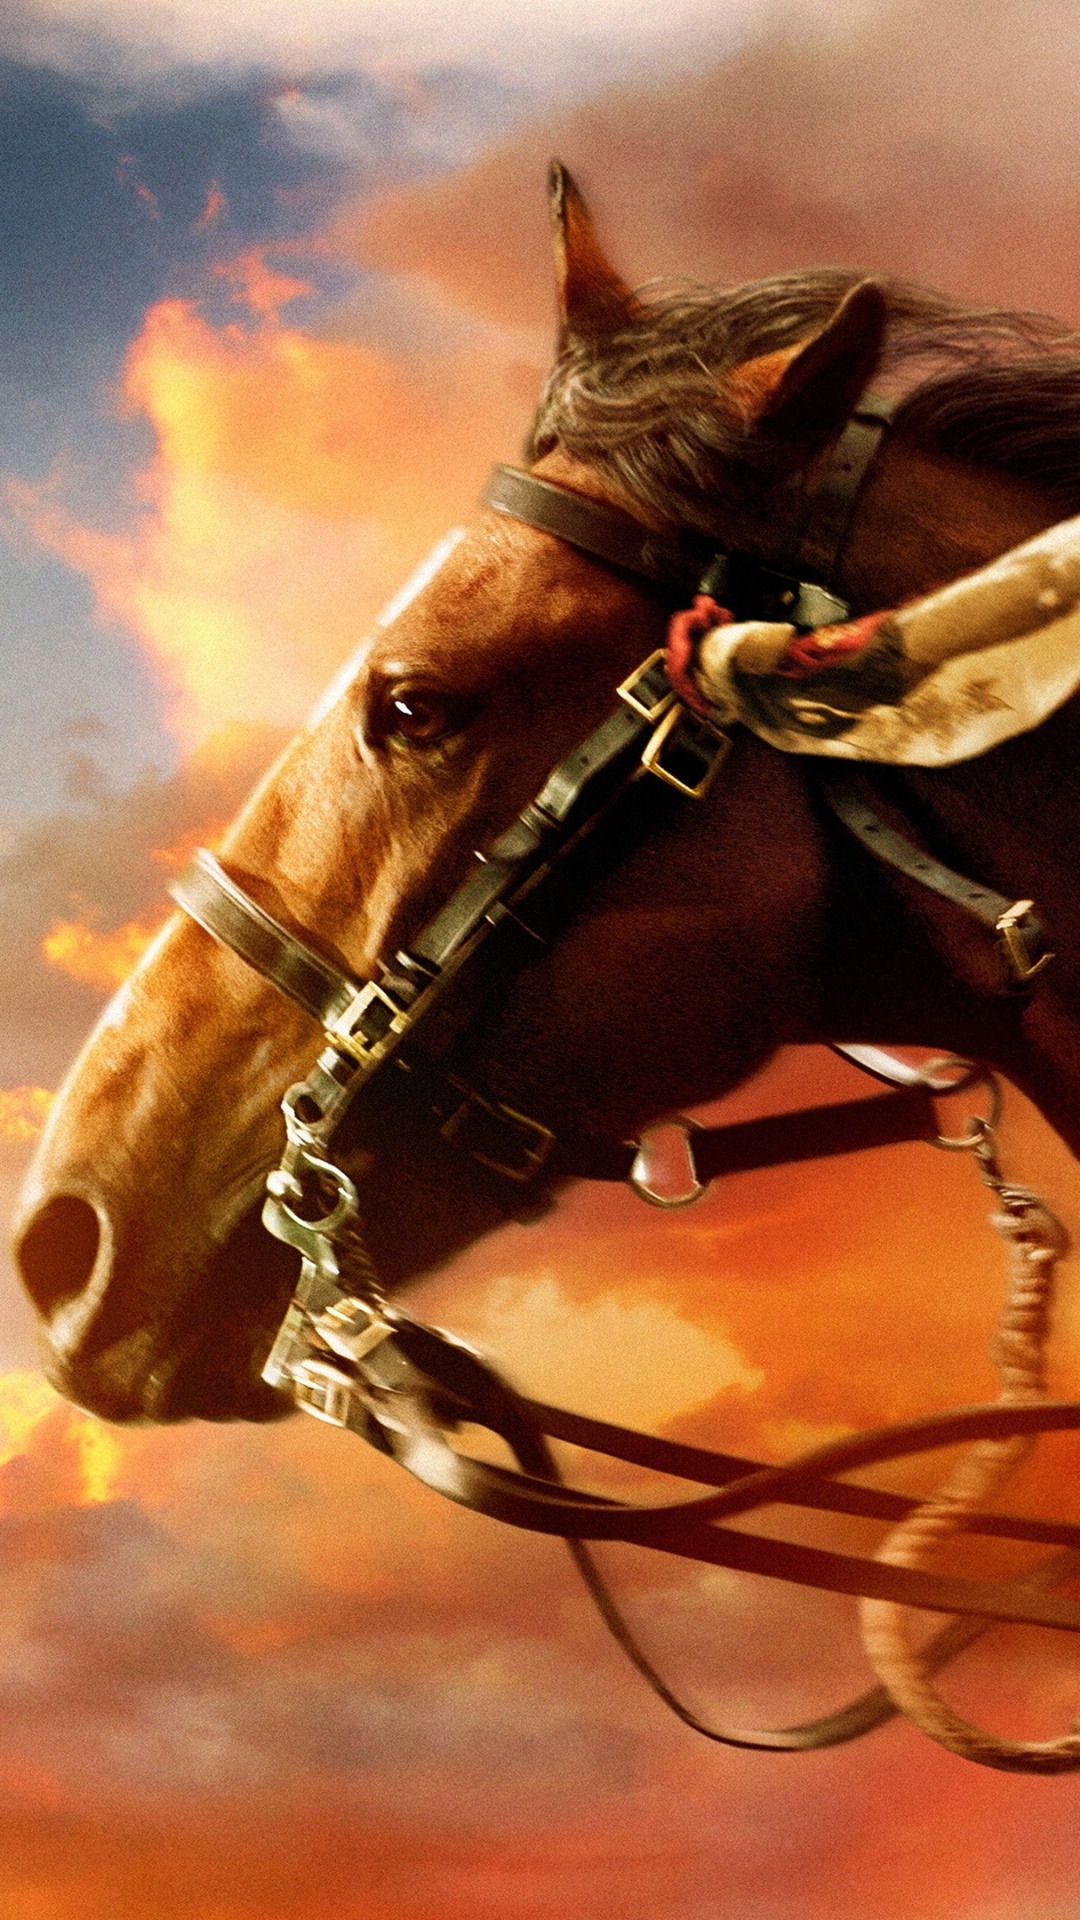 War Horse: Animal, Joey, Colt, Movie character. 1080x1920 Full HD Background.